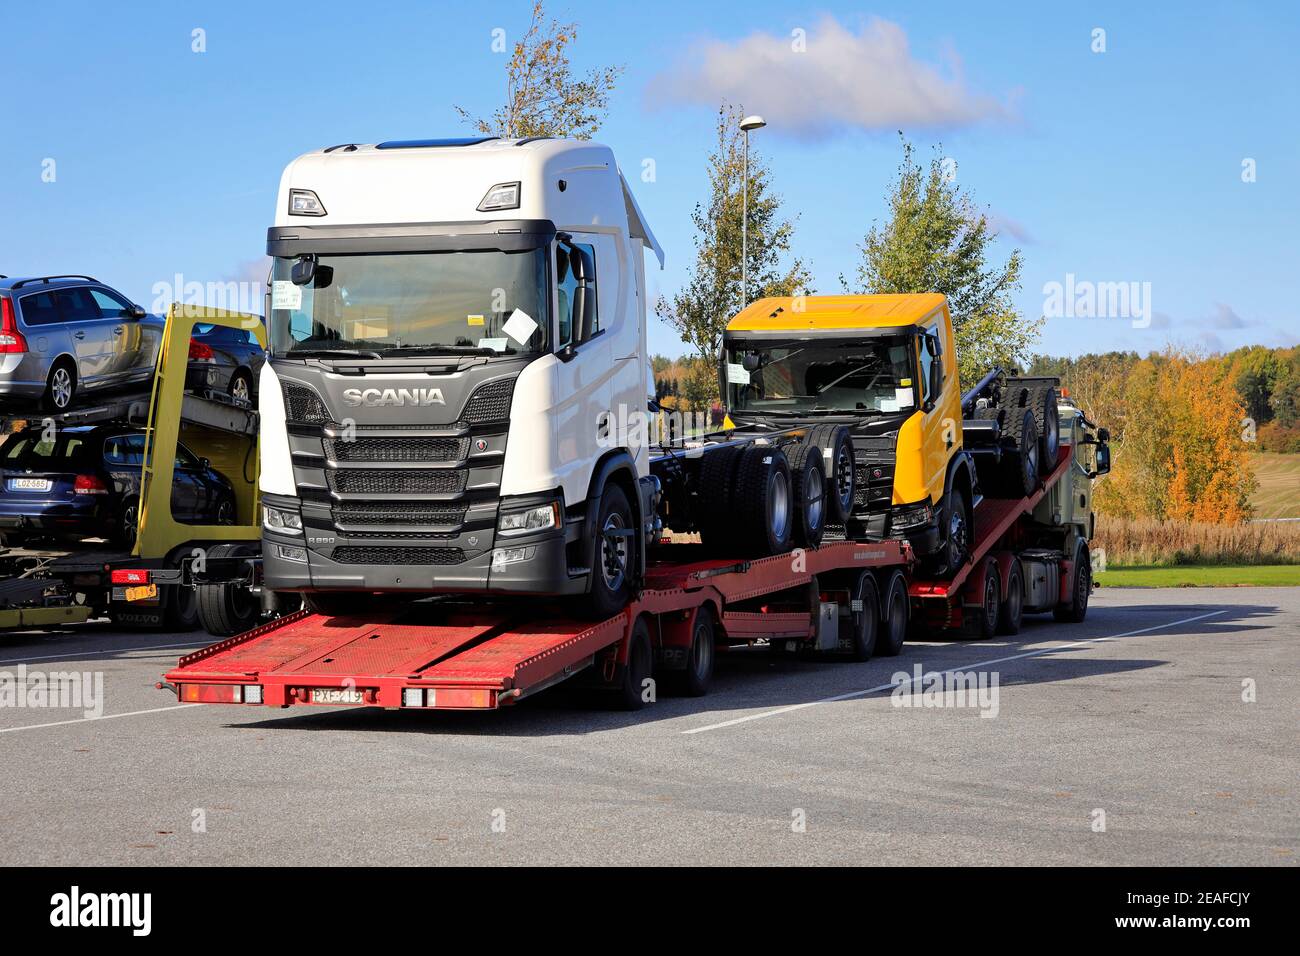 Vehicle carrier carrying two new Scania trucks, white R650 and yellow R650 XT, parked on truck stop yard. Salo, Finland. October 5, 2019. Stock Photo